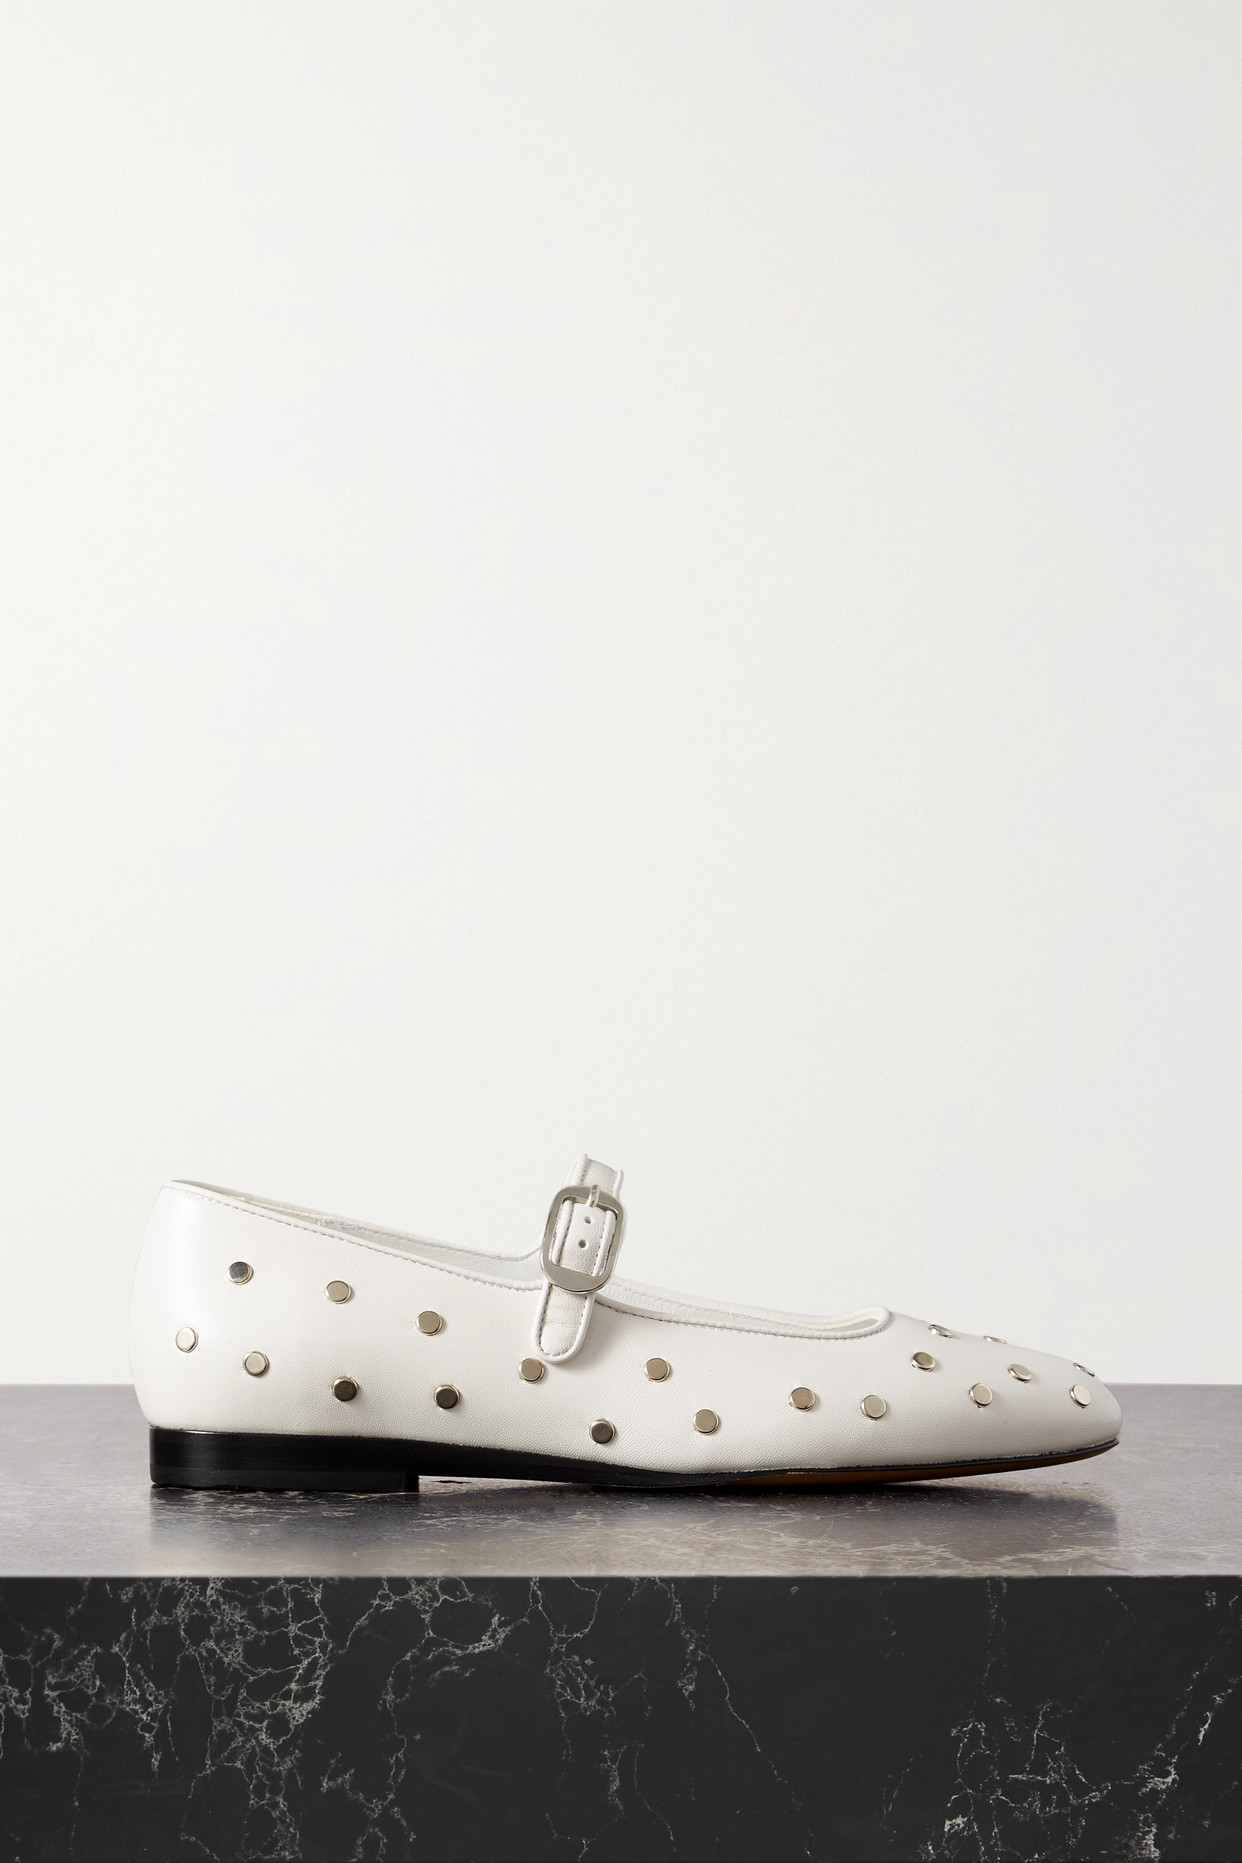 Studded Leather Mary Jane Ballet Flats